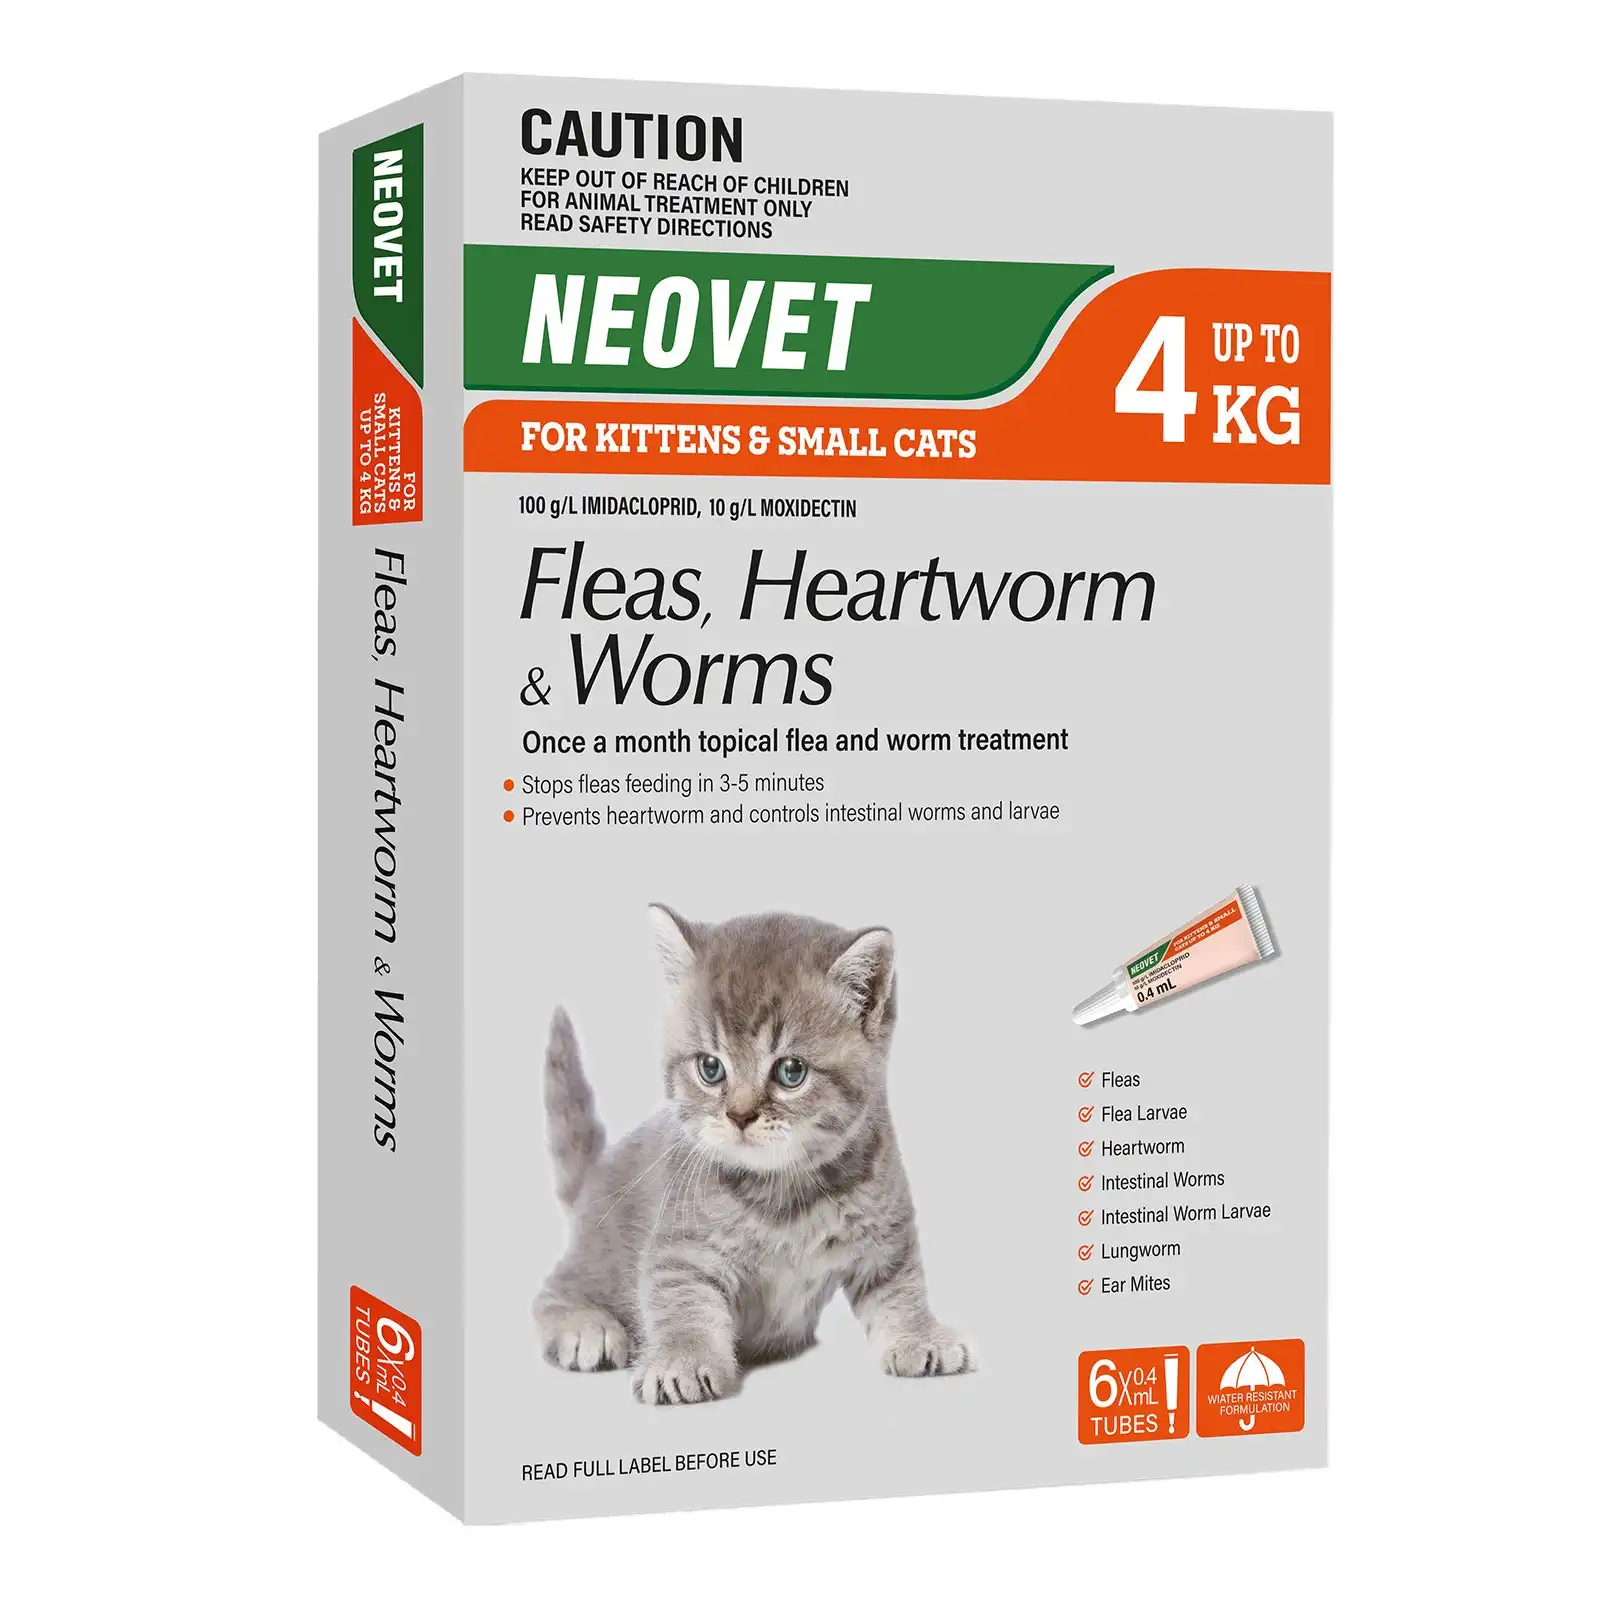 Neovet for Kittens and Small Cats Up To 4 Kg (ORANGE) 6 Pack